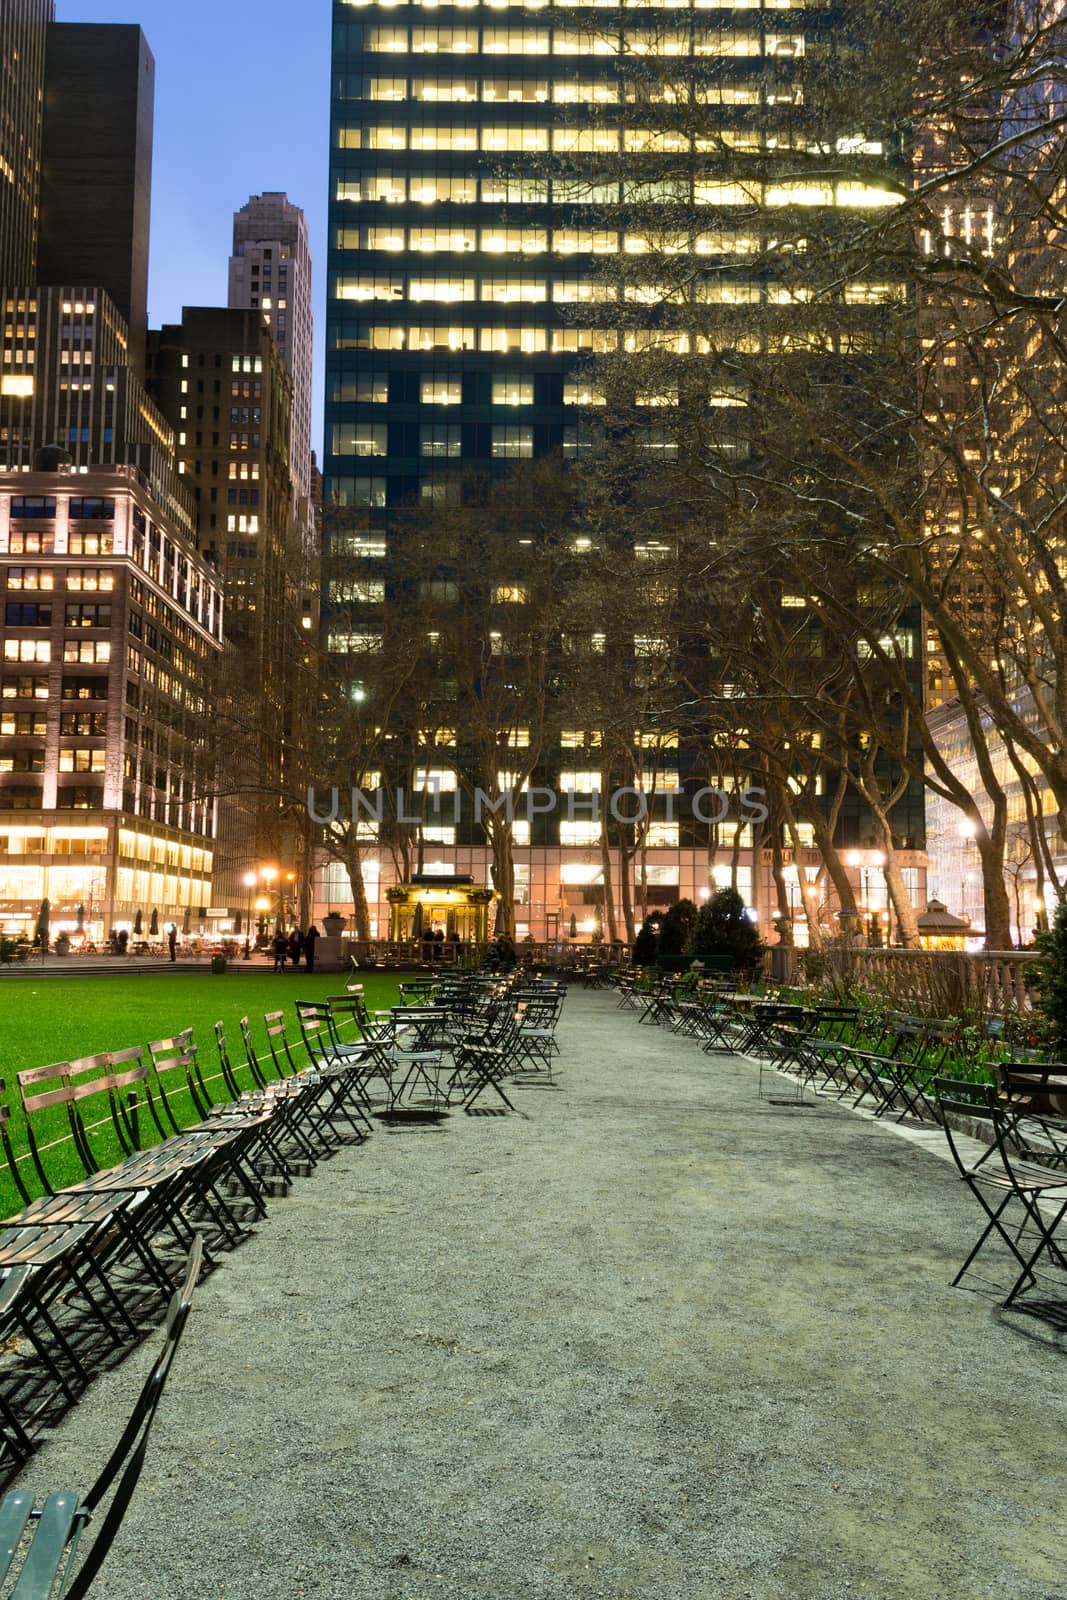 Path by the lwan in Bryant Park by rmbarricarte